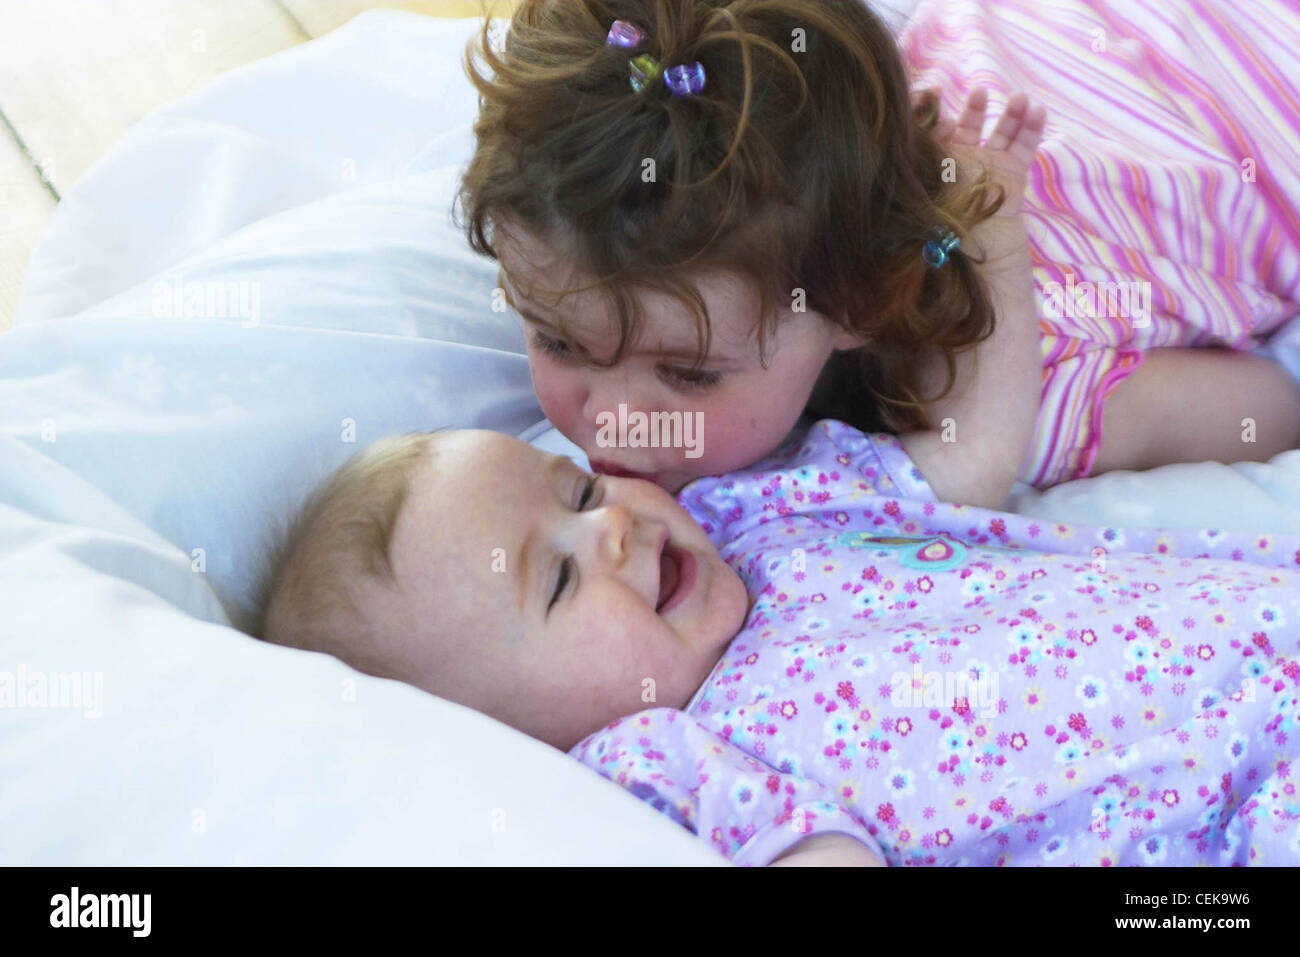 Female child brunette hair tied in topknot wearing pink stripey top leaning over female baby kissing her on cheek, baby is Stock Photo